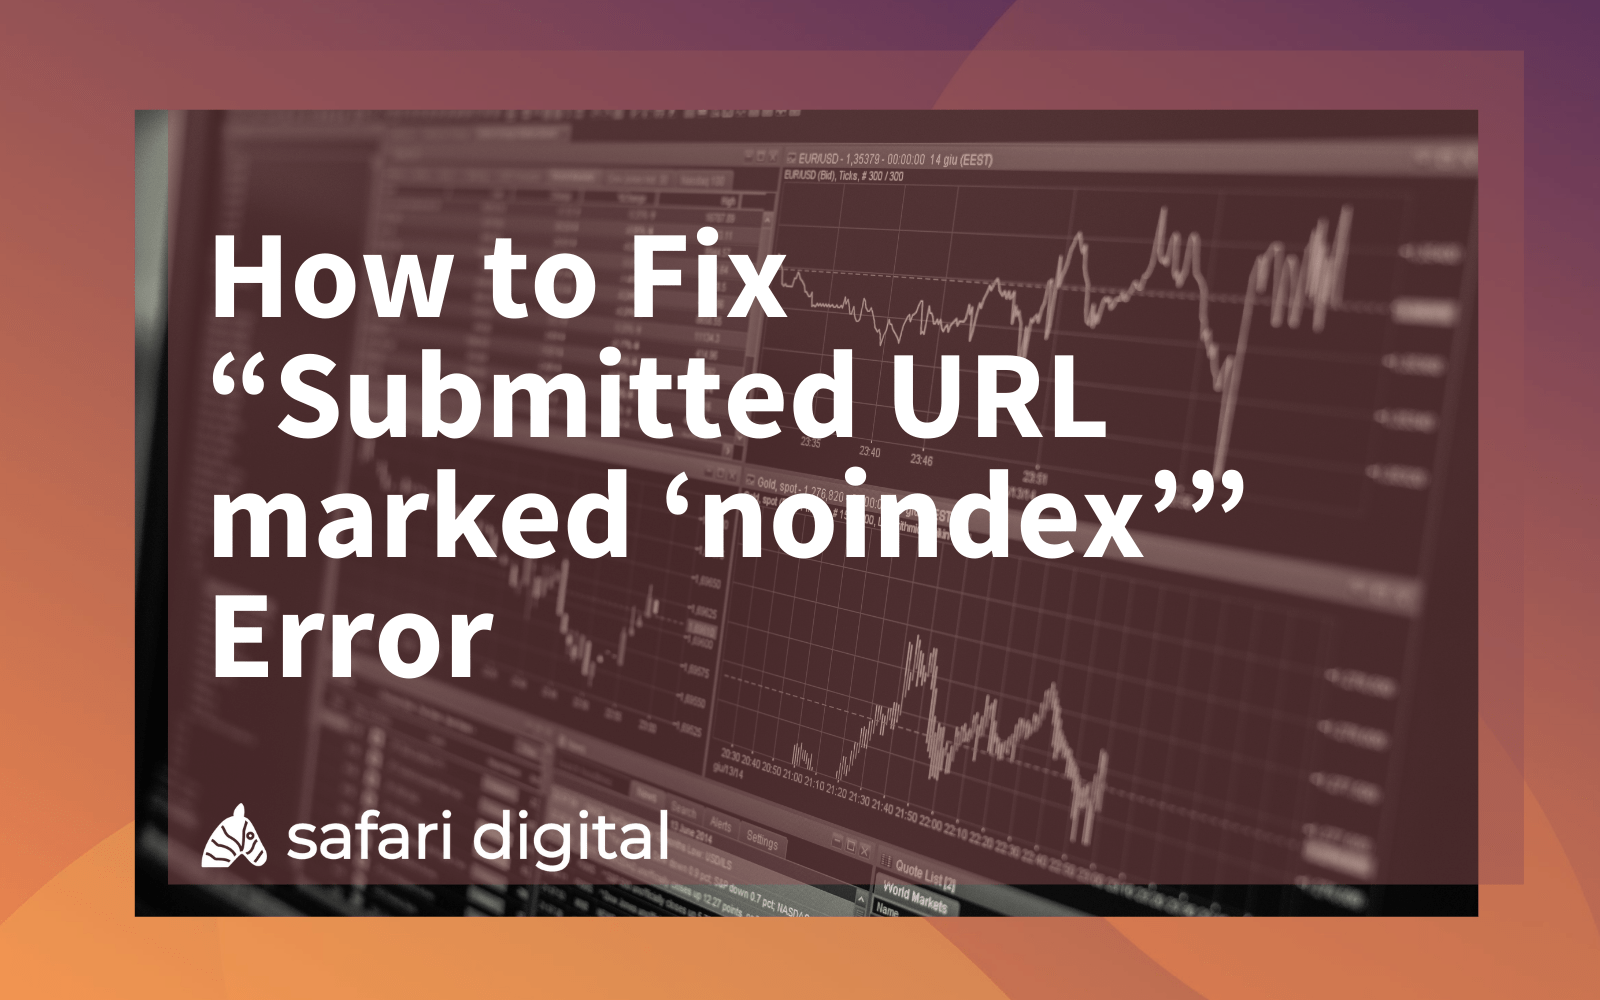 How to Fix “Submitted URL marked ‘noindex’” Error - cover image